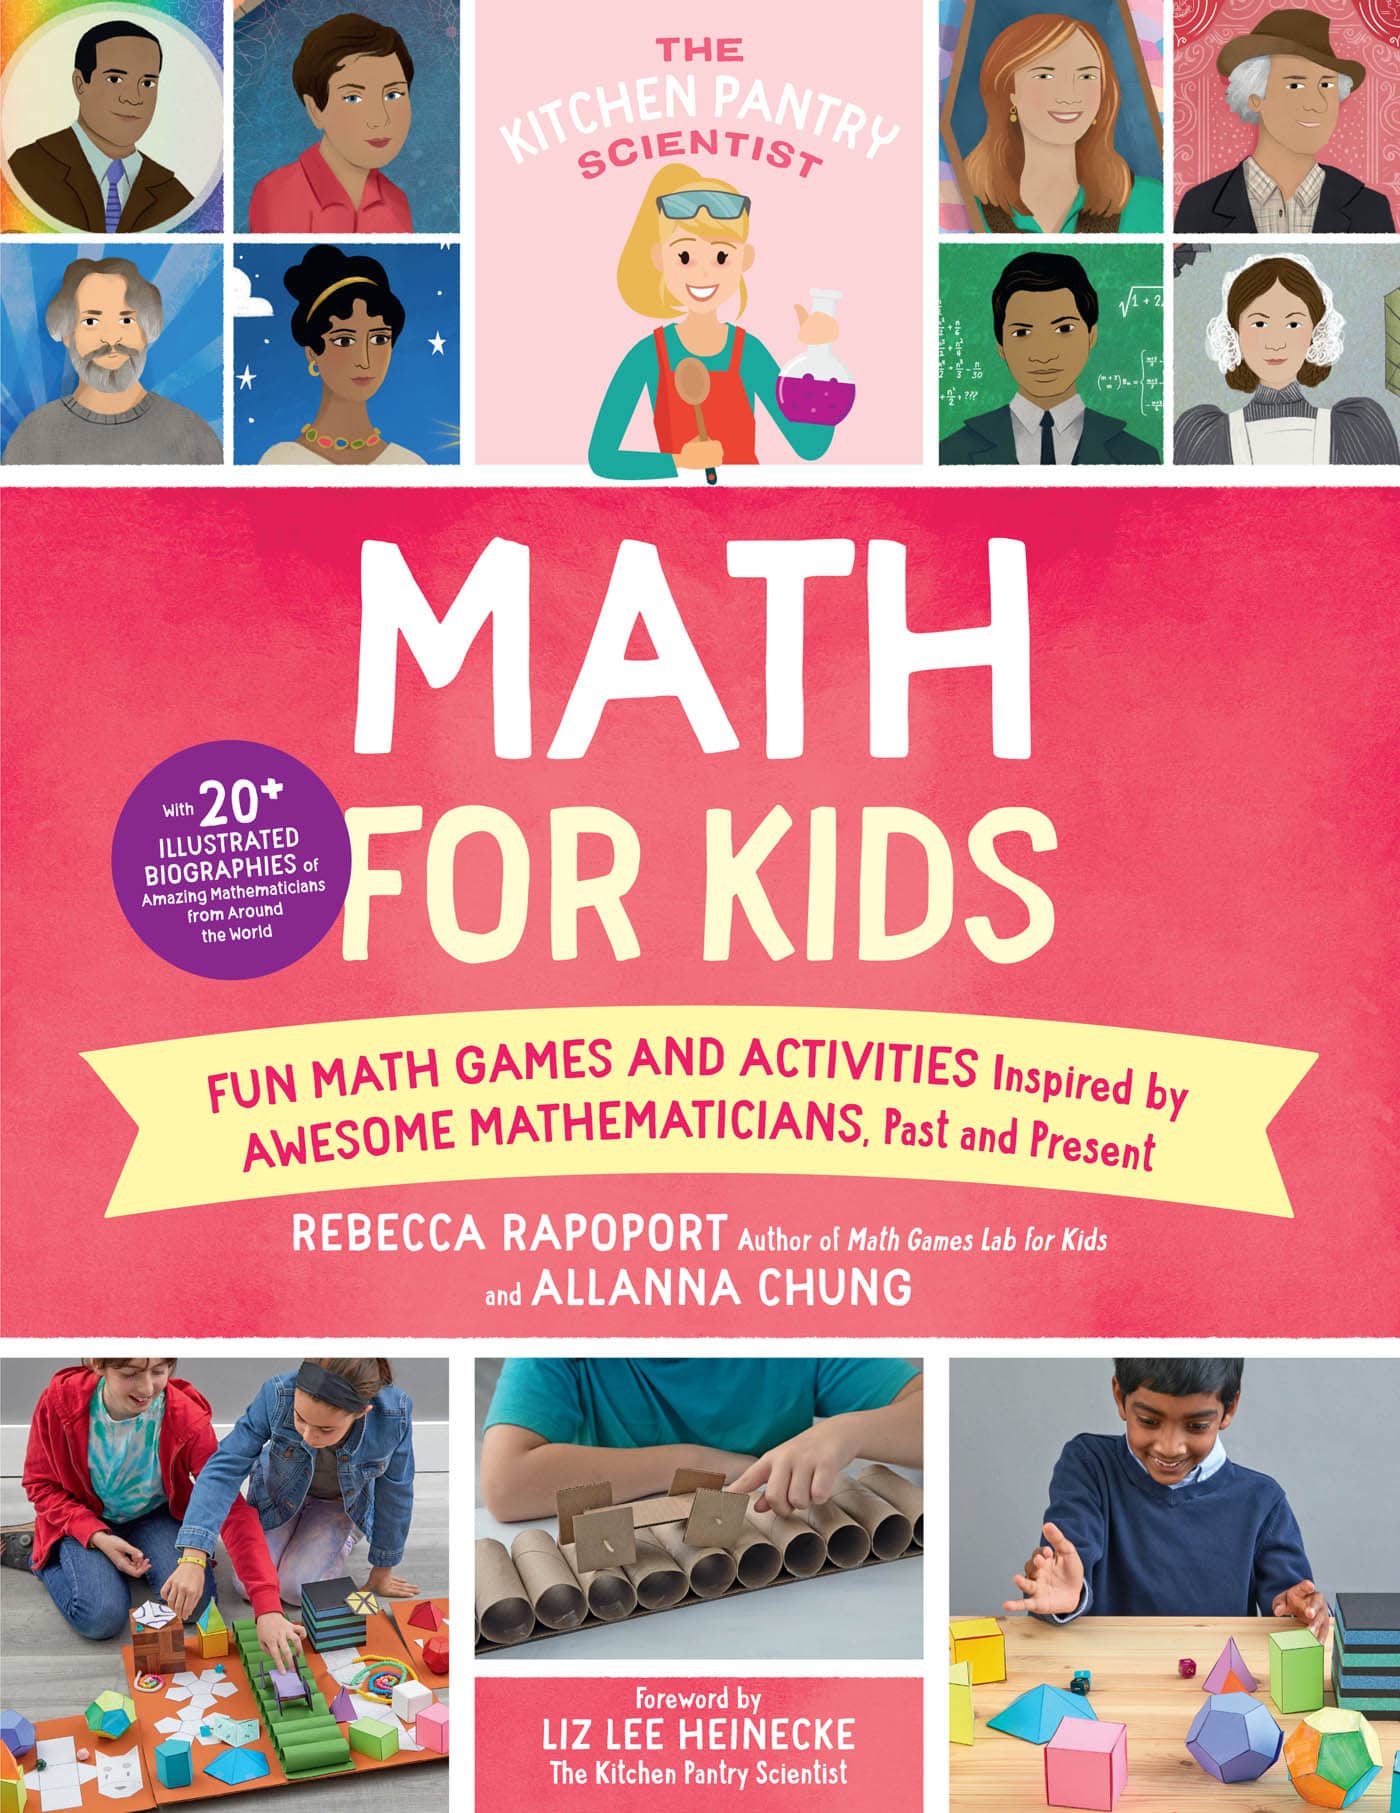 The Kitchen Pantry Scientist Math for Kids: Fun MATH GAMES AND ACTIVITIES Inspired by AWESOME MATHEMATICIANS, Past and Present